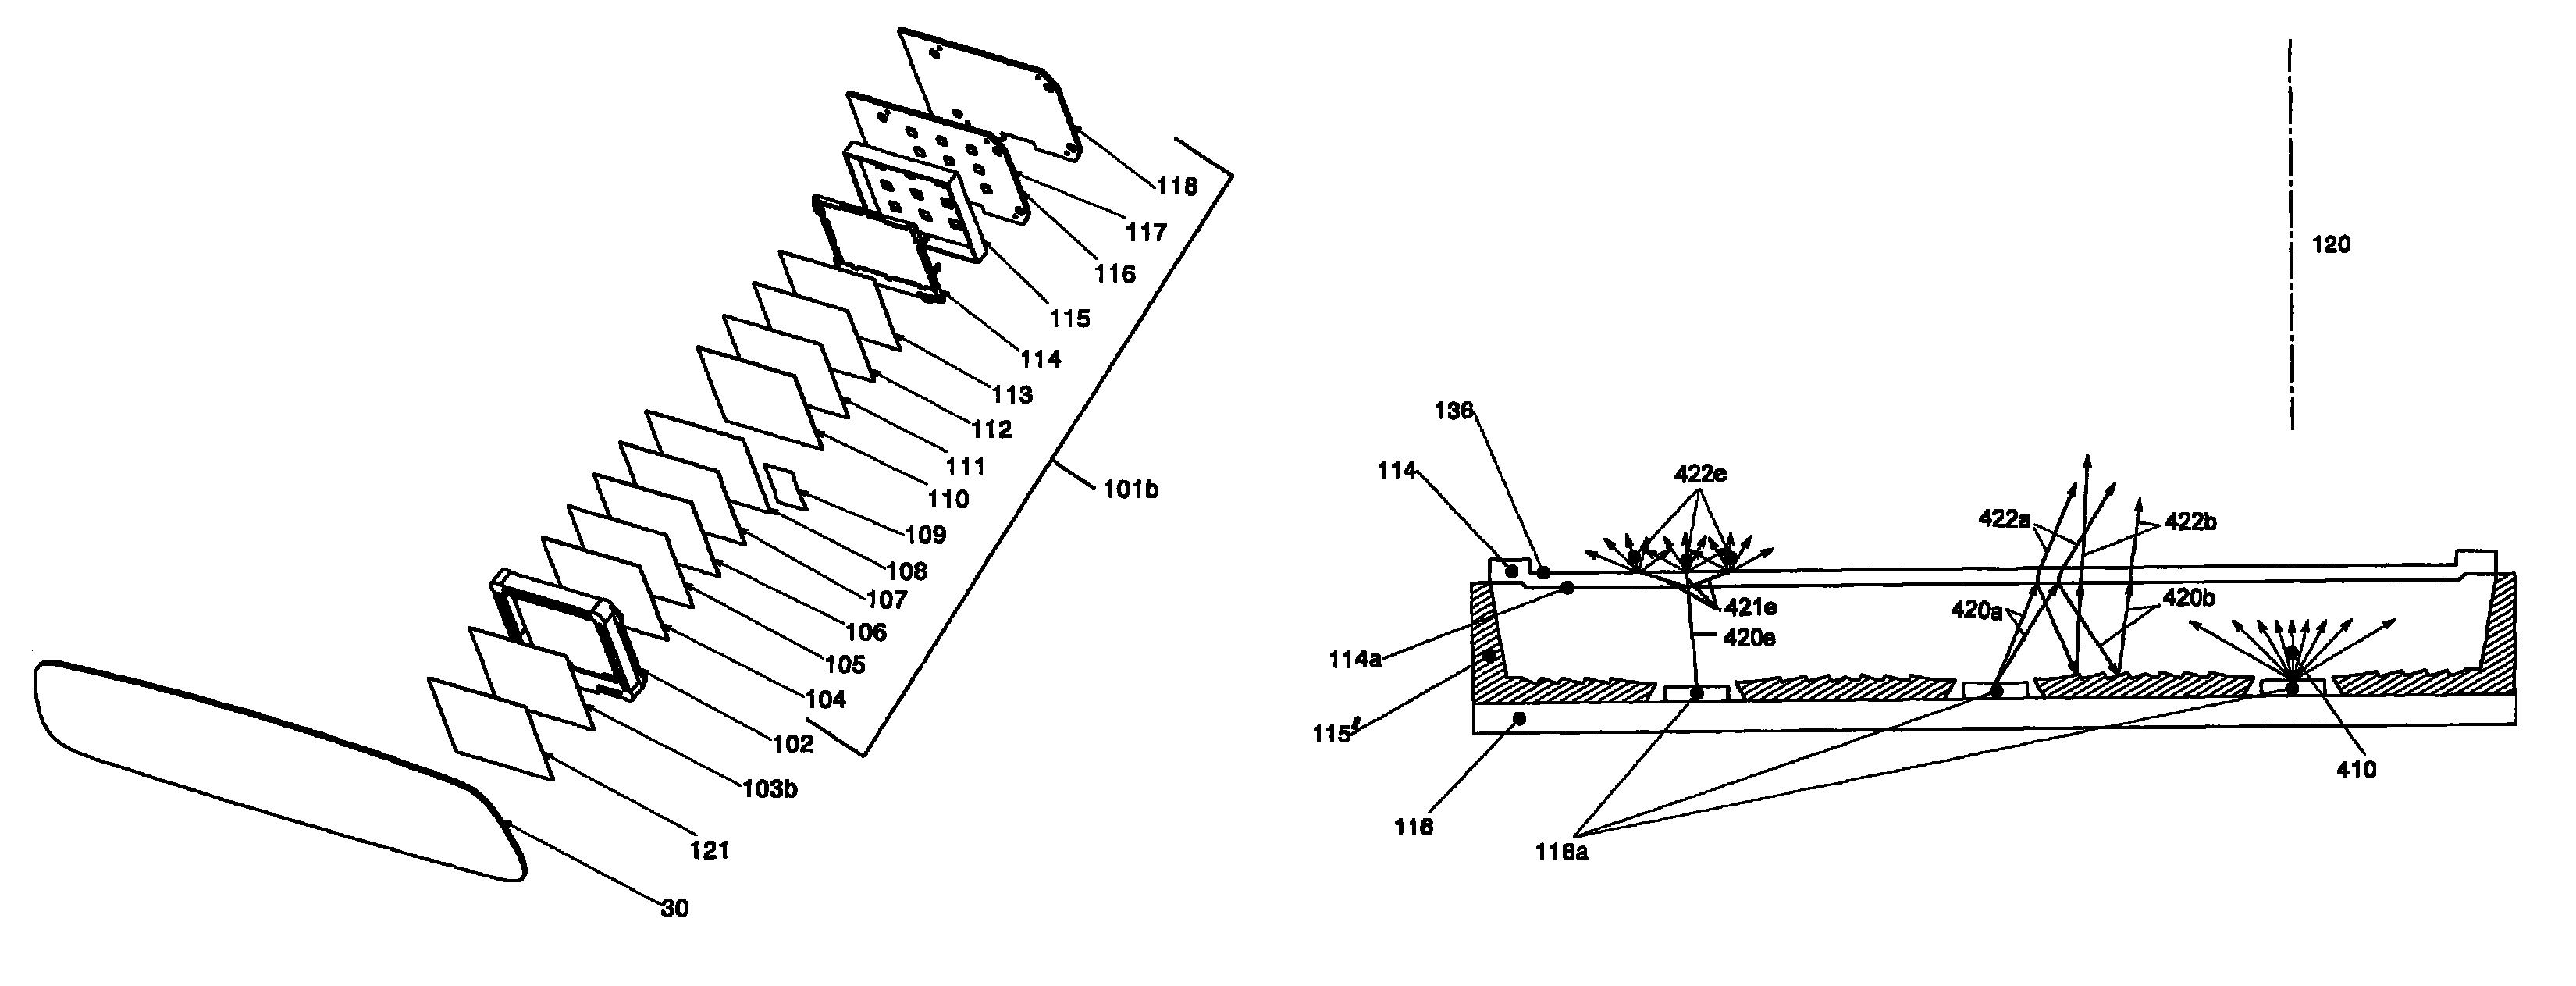 Vehicle rearview mirror assembly including a high intensity display